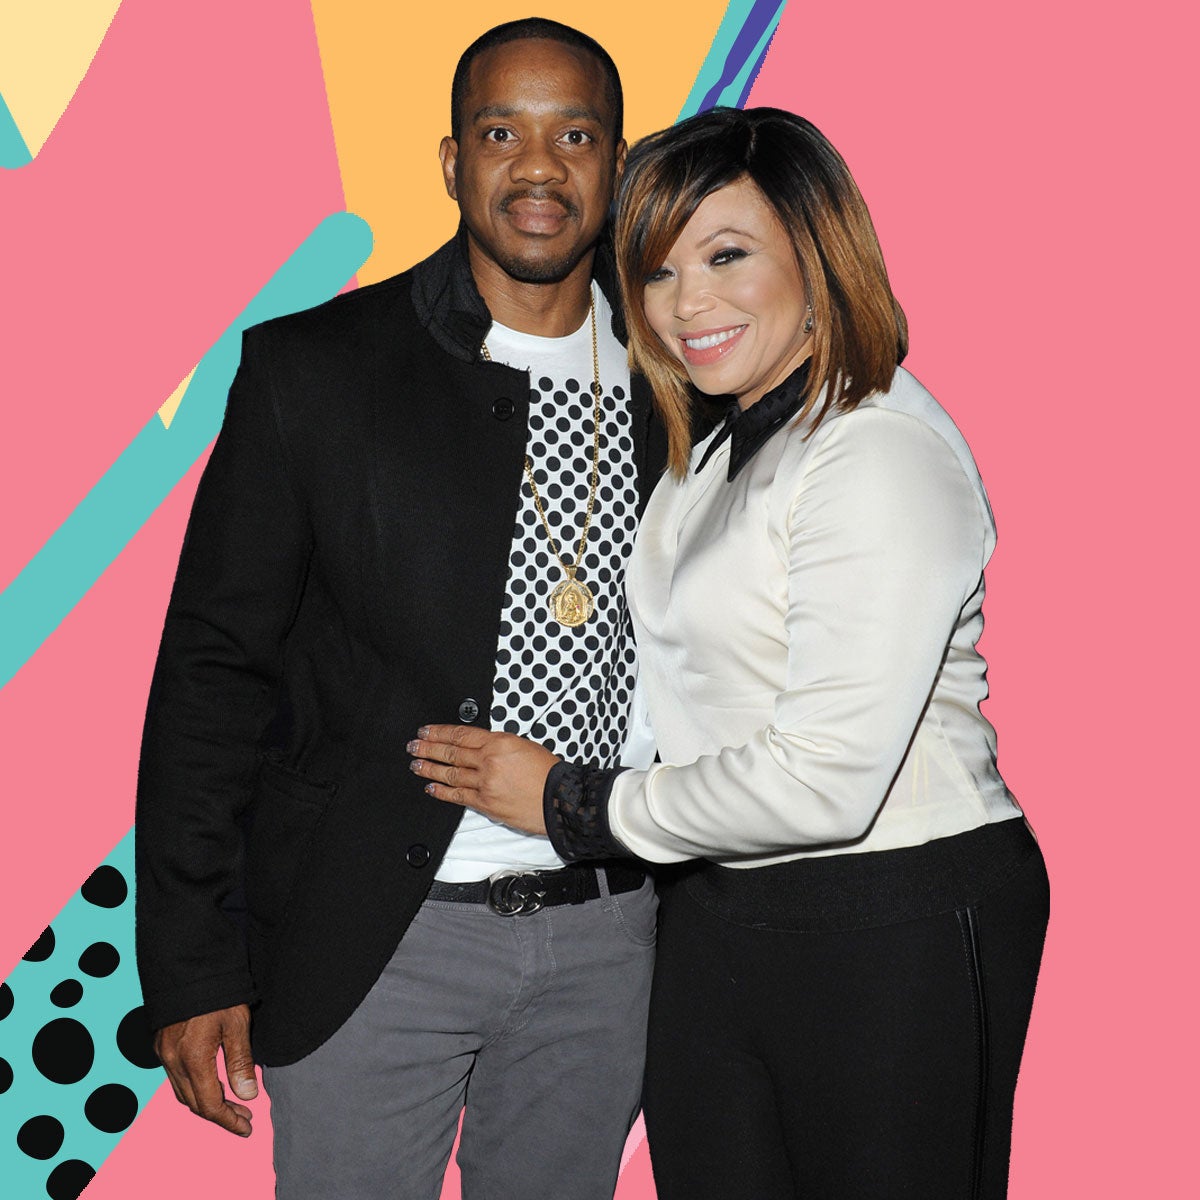 Tisha CampbellMartin Files For Divorce From Duane Martin After 20Plus